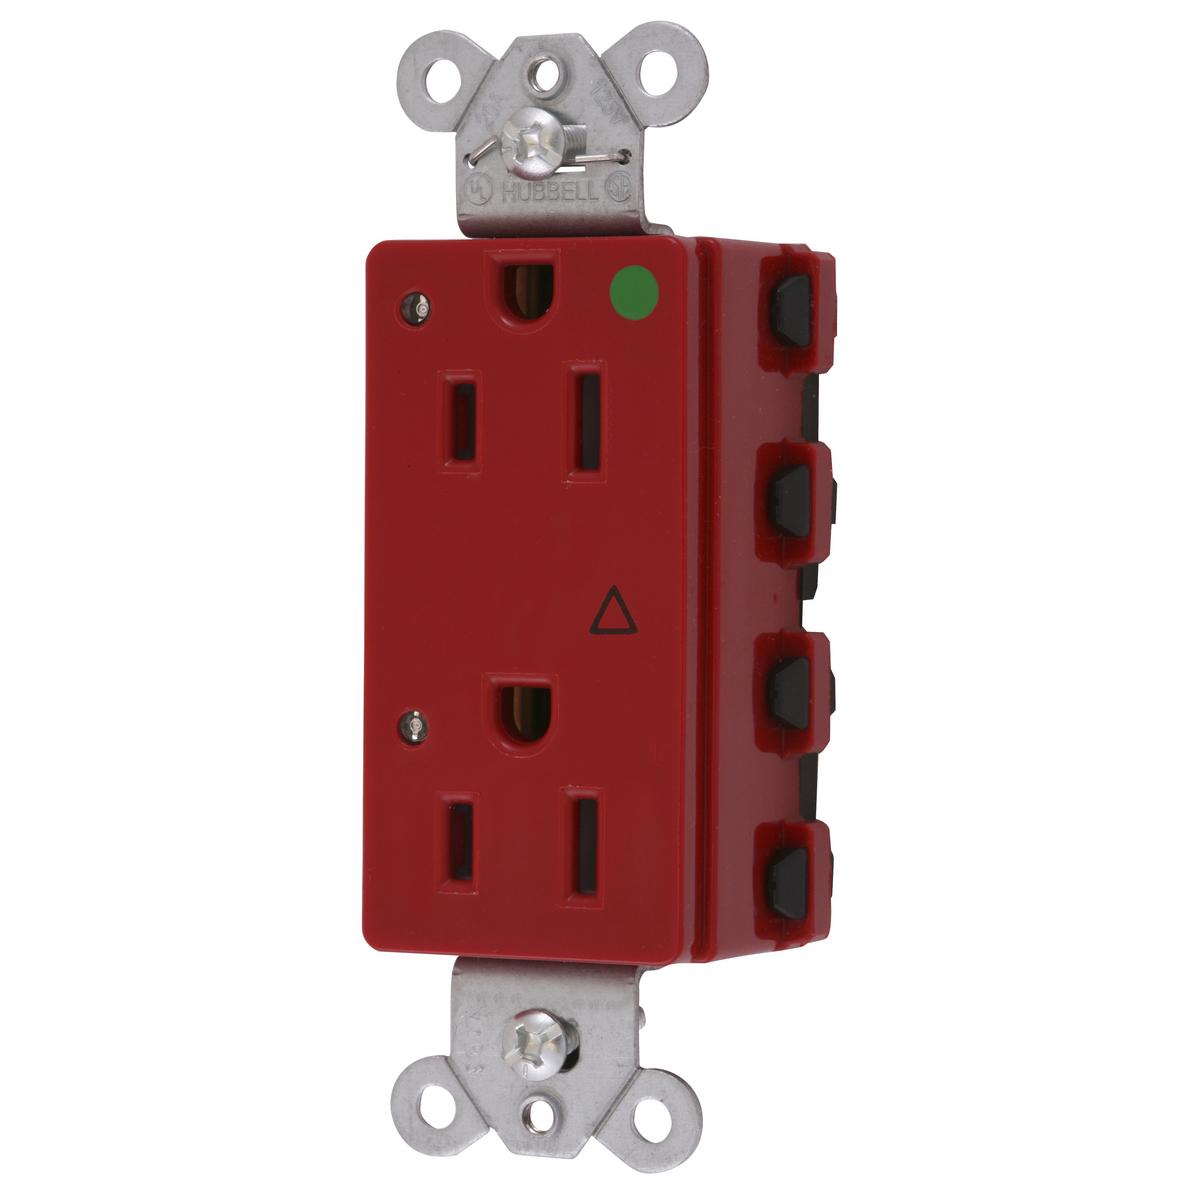 Hubbell SNAP2172RIGL Straight Blade Devices, Receptacles, Style Line Decorator, SNAPConnect, Hospital Grade, Isolated Ground, LED Indicator, 15A 125V, 2-Pole 3- Wire Grounding, 5-15R, Nylon, Red  ; Audible SNAP, indicates solid connection ; Reduces installation time ; Isolate